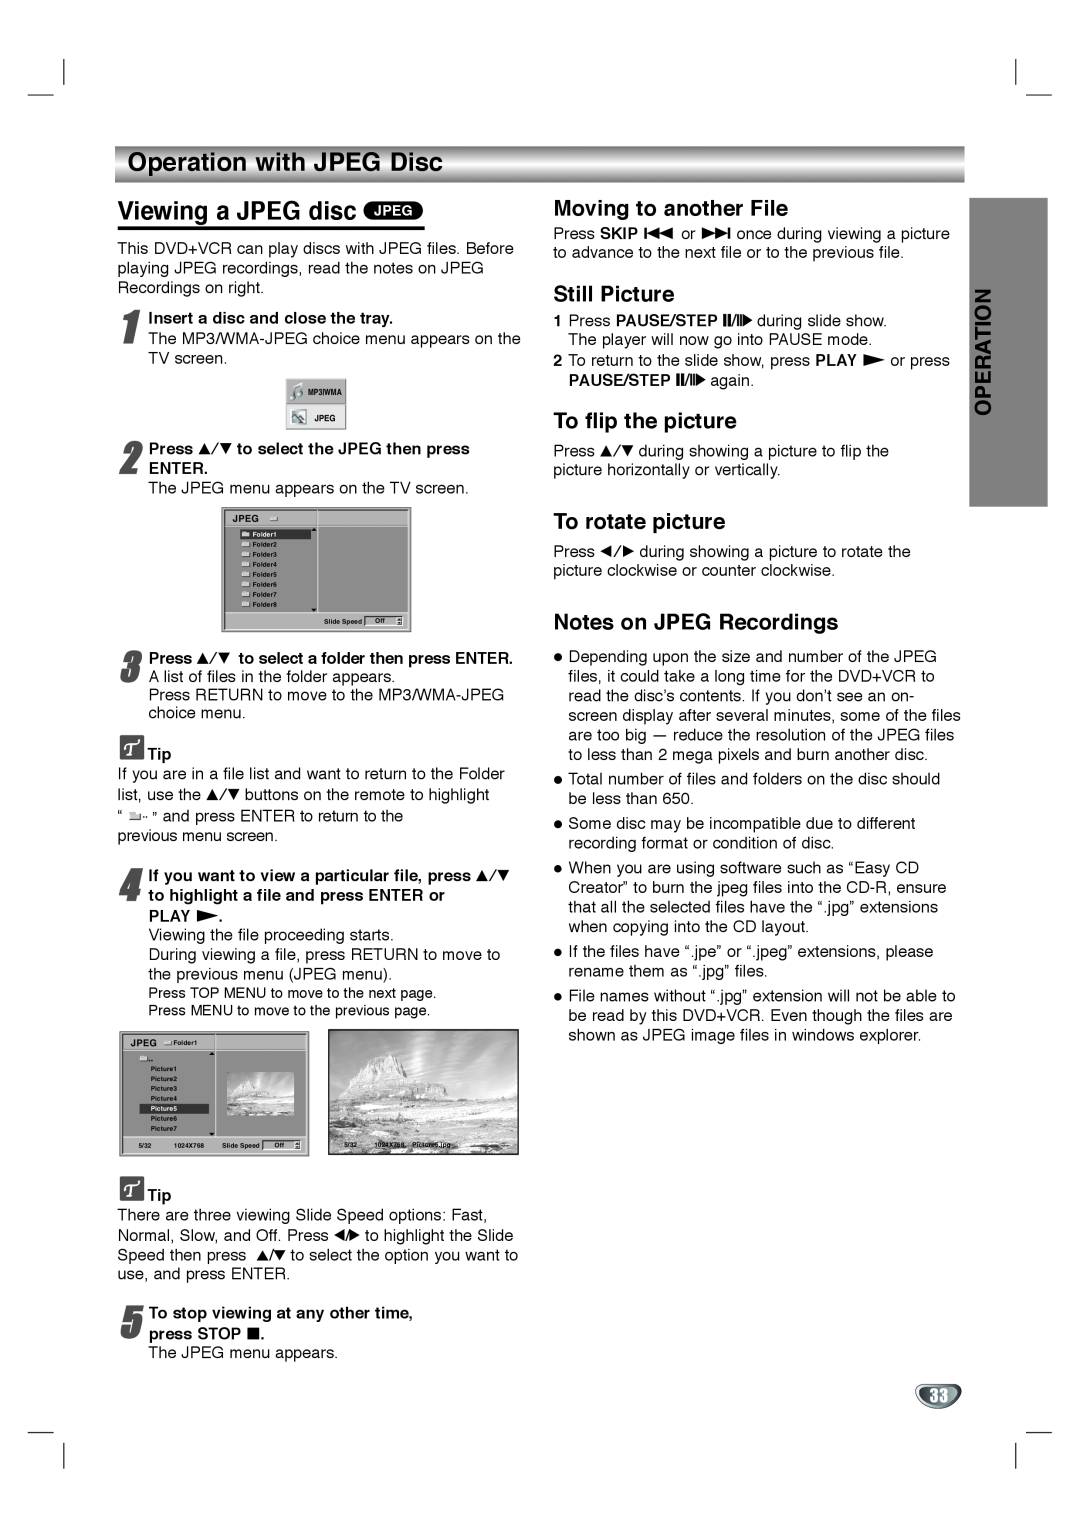 Toshiba SD-K530SU owner manual Operation with JPEG Disc Viewing a JPEG disc JPEG, Moving to another File, Still Picture 